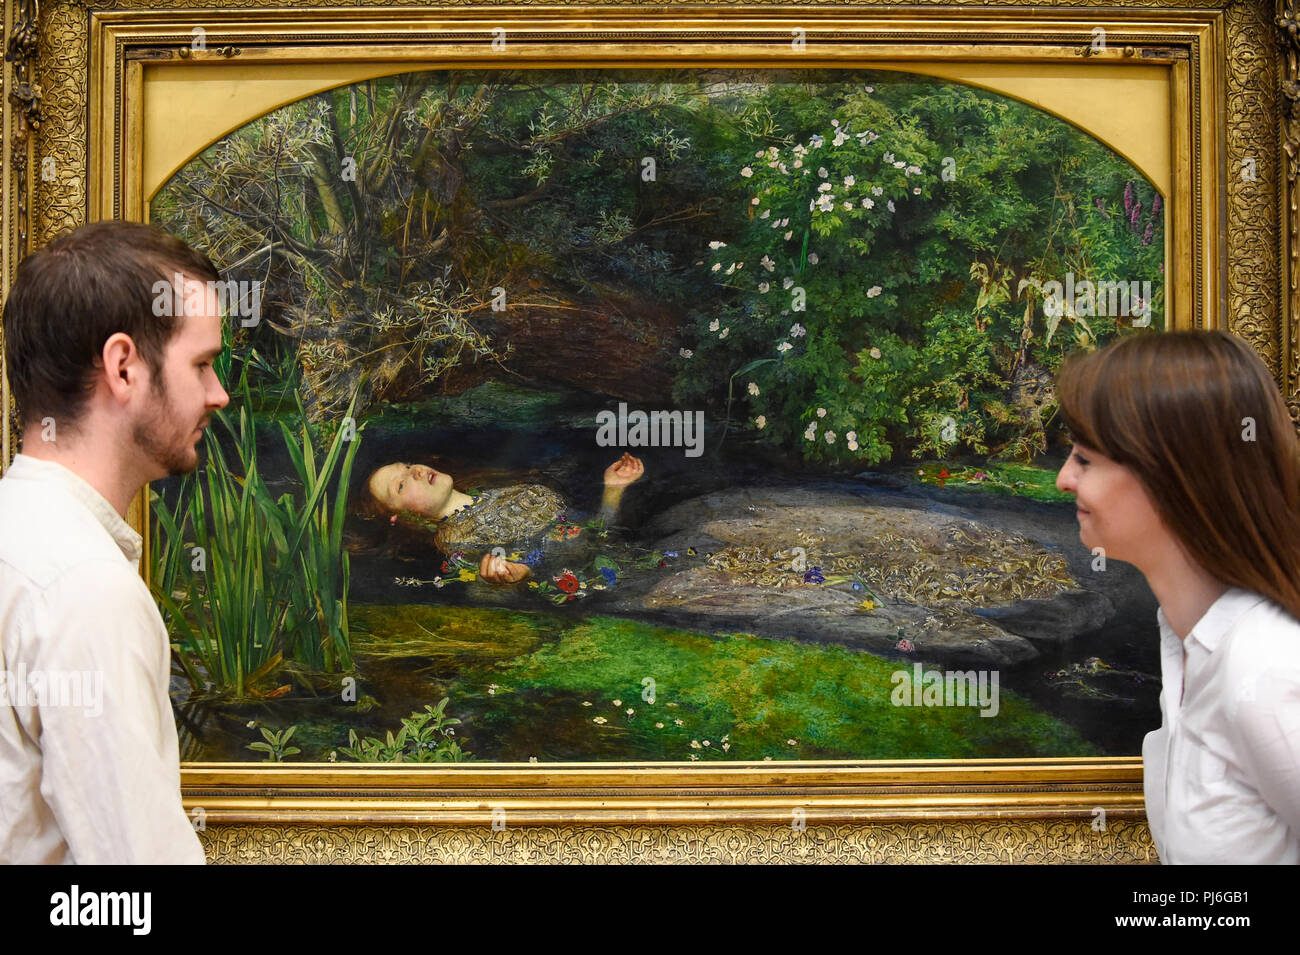 London, UK.  5 September 2018.  Staff members view 'Ophelia', 1851-52, by John Everett Millais, at Tate Britain, to mark the launch of a major new exhibition at the National Gallery of Australia (NGA) in December 2018.  Over forty Pre-Raphaelite works will be loaned by Tate to NGA, which have never been shown in Australia until now, including 'Ophelia', 1851-52, by John Everett Millais and 'The Lady of Shalott', 1888, by John William Waterhouse. Credit: Stephen Chung / Alamy Live News Stock Photo